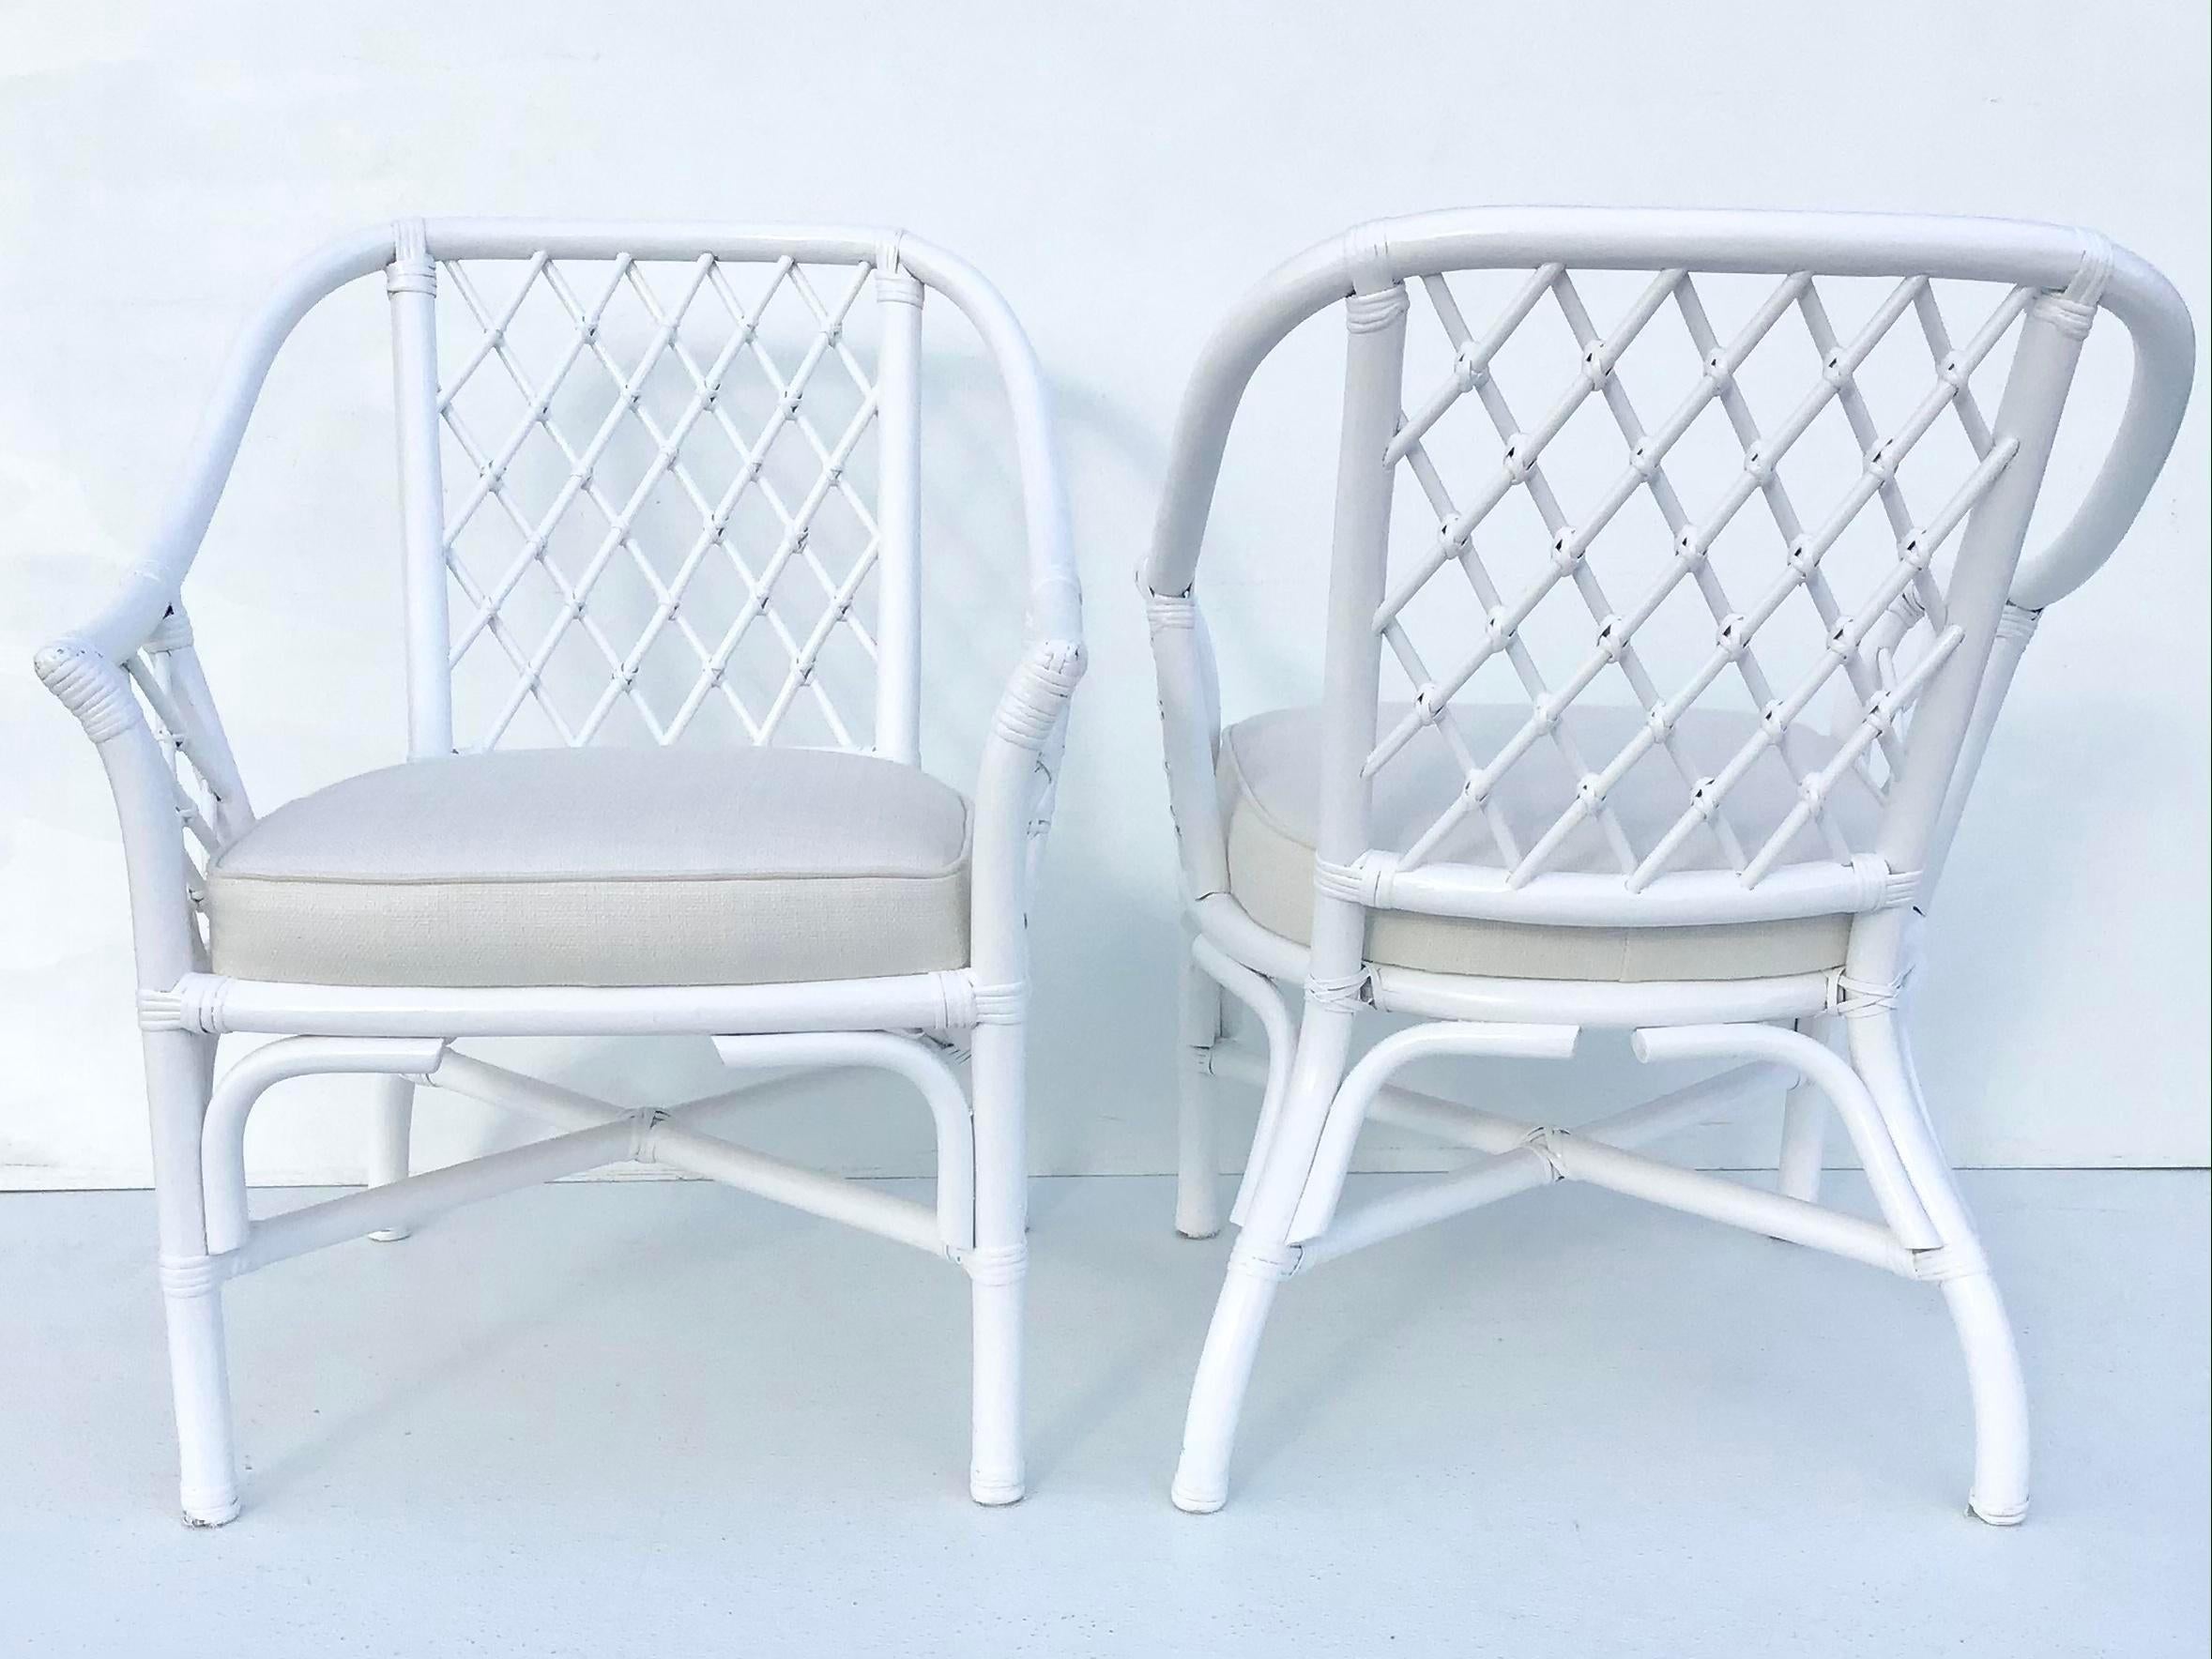 Mid-20th Century Ficks Reed Barrel Chairs in White Lacquer and Todd Hase Textiles, a Pair For Sale